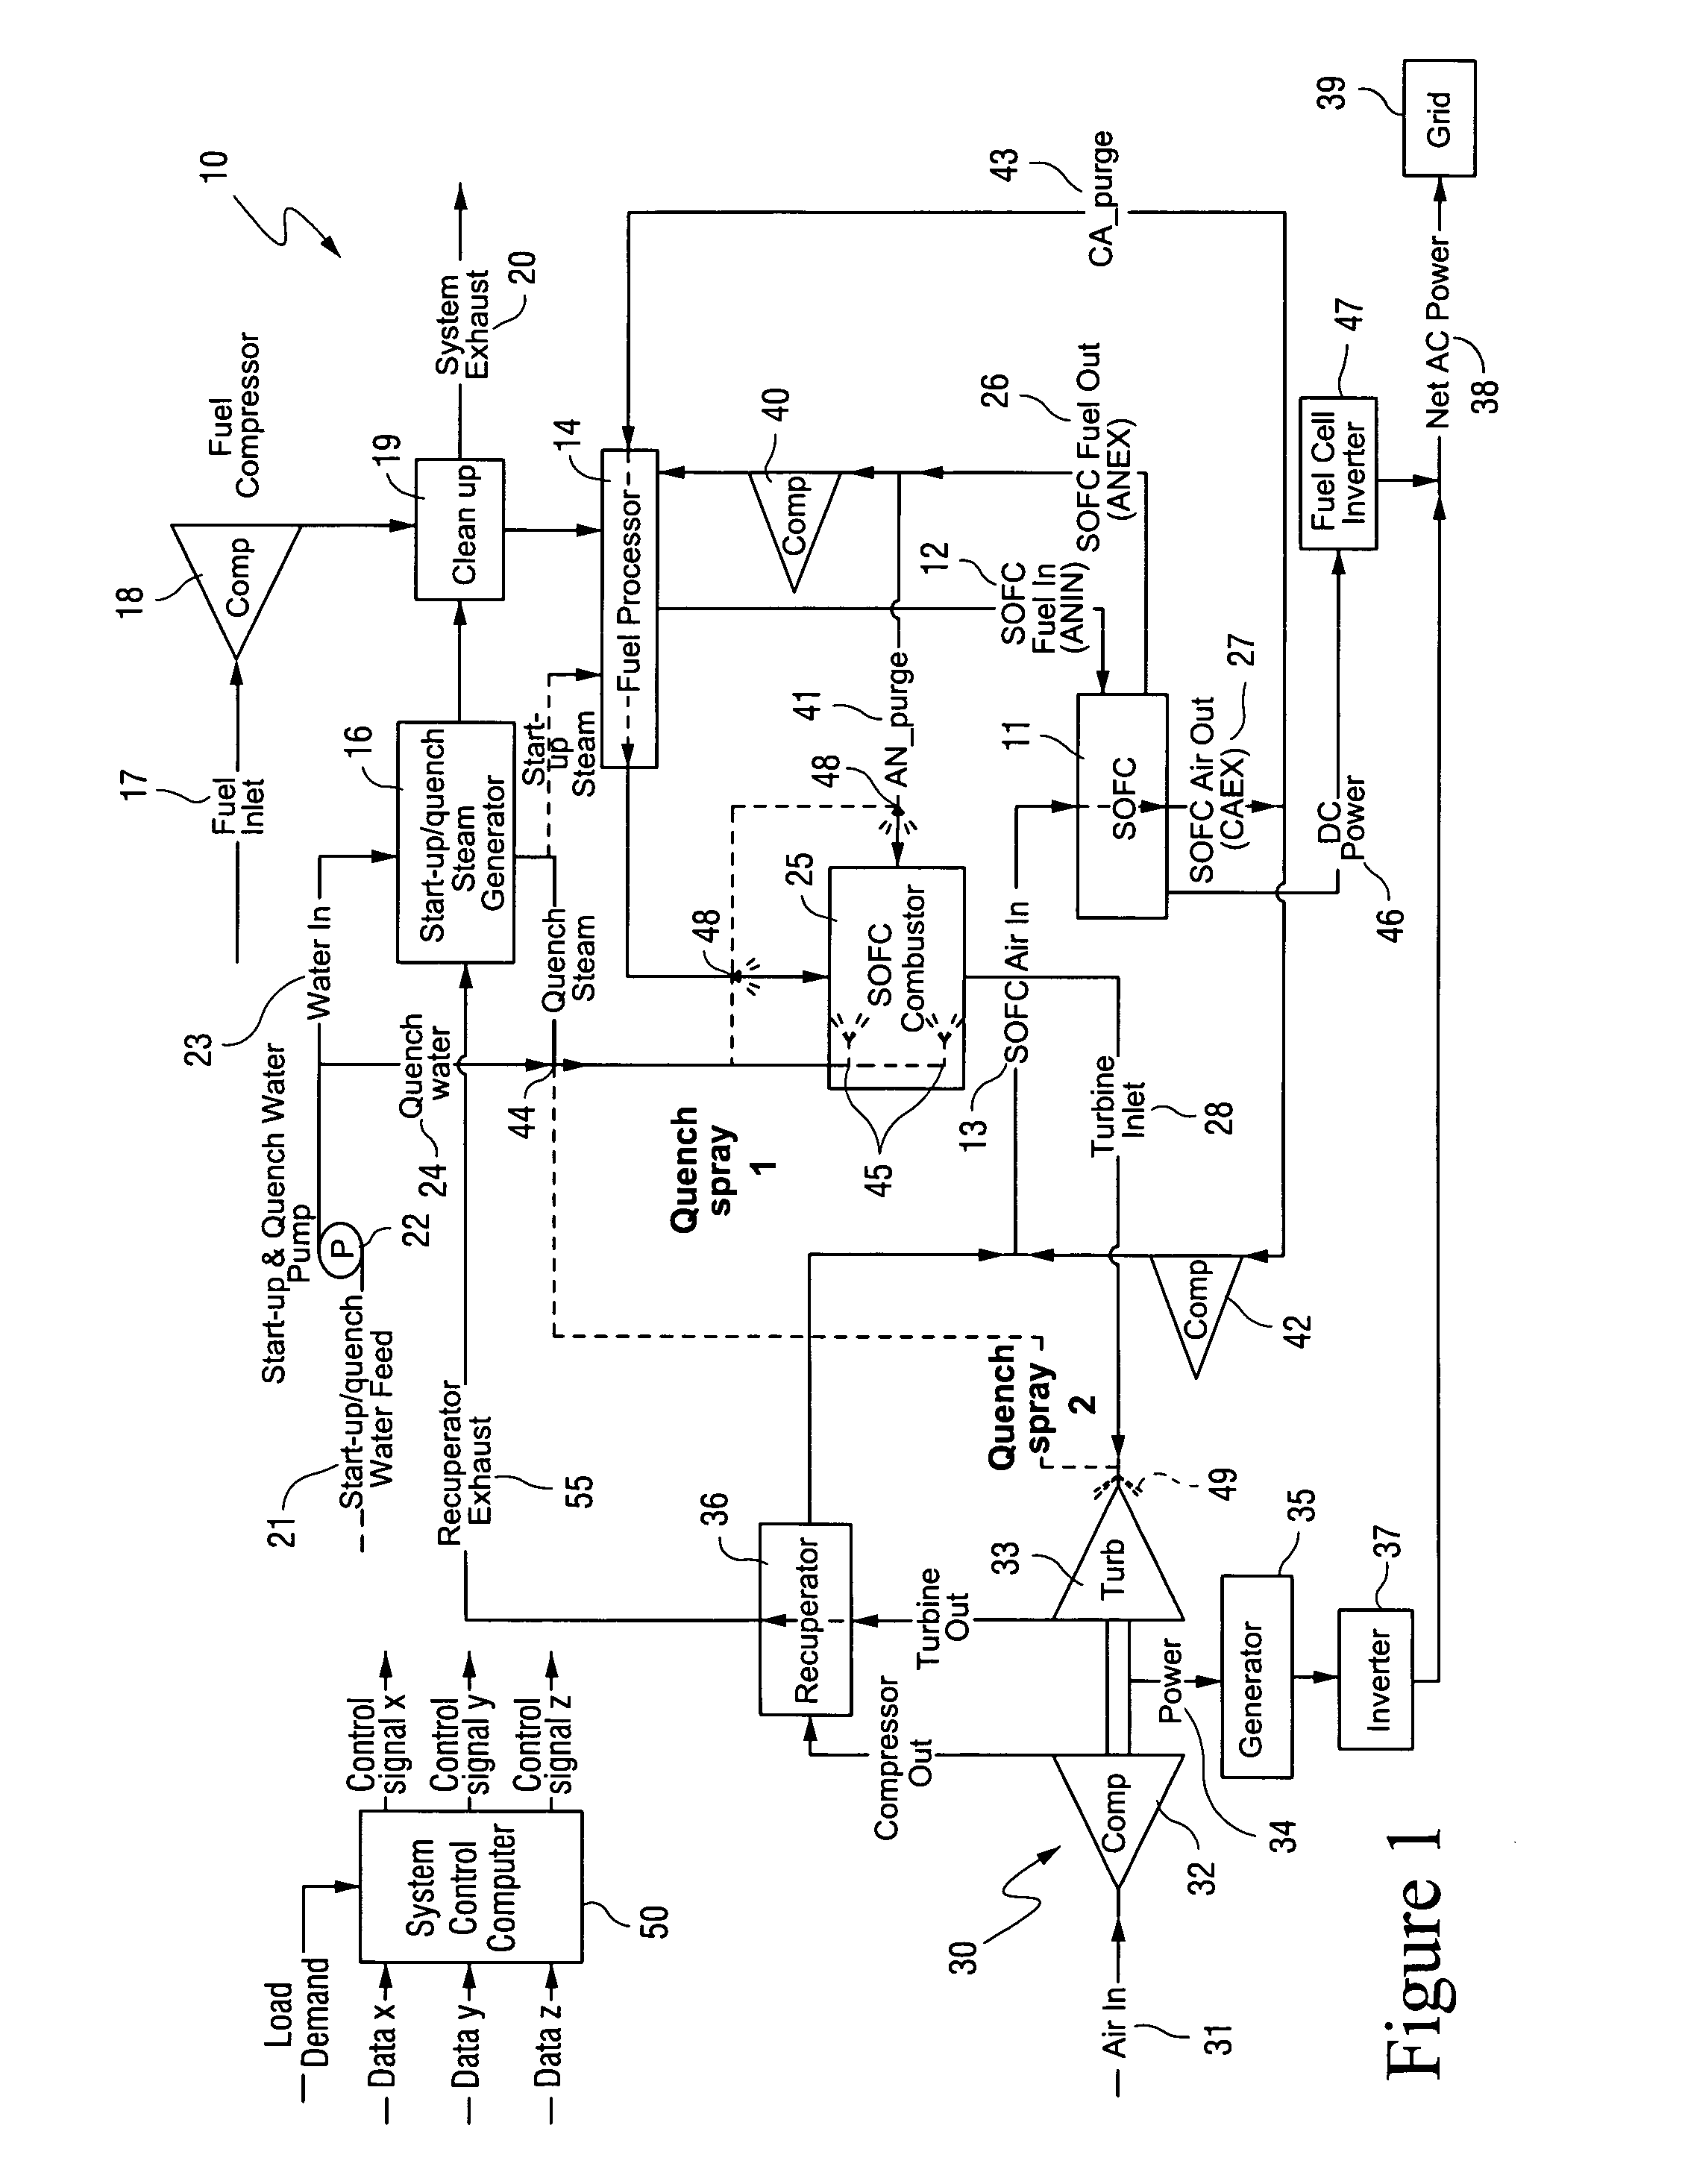 High temperature protection of hybrid fuel cell system combustor and other components VIA water or water vapor injection